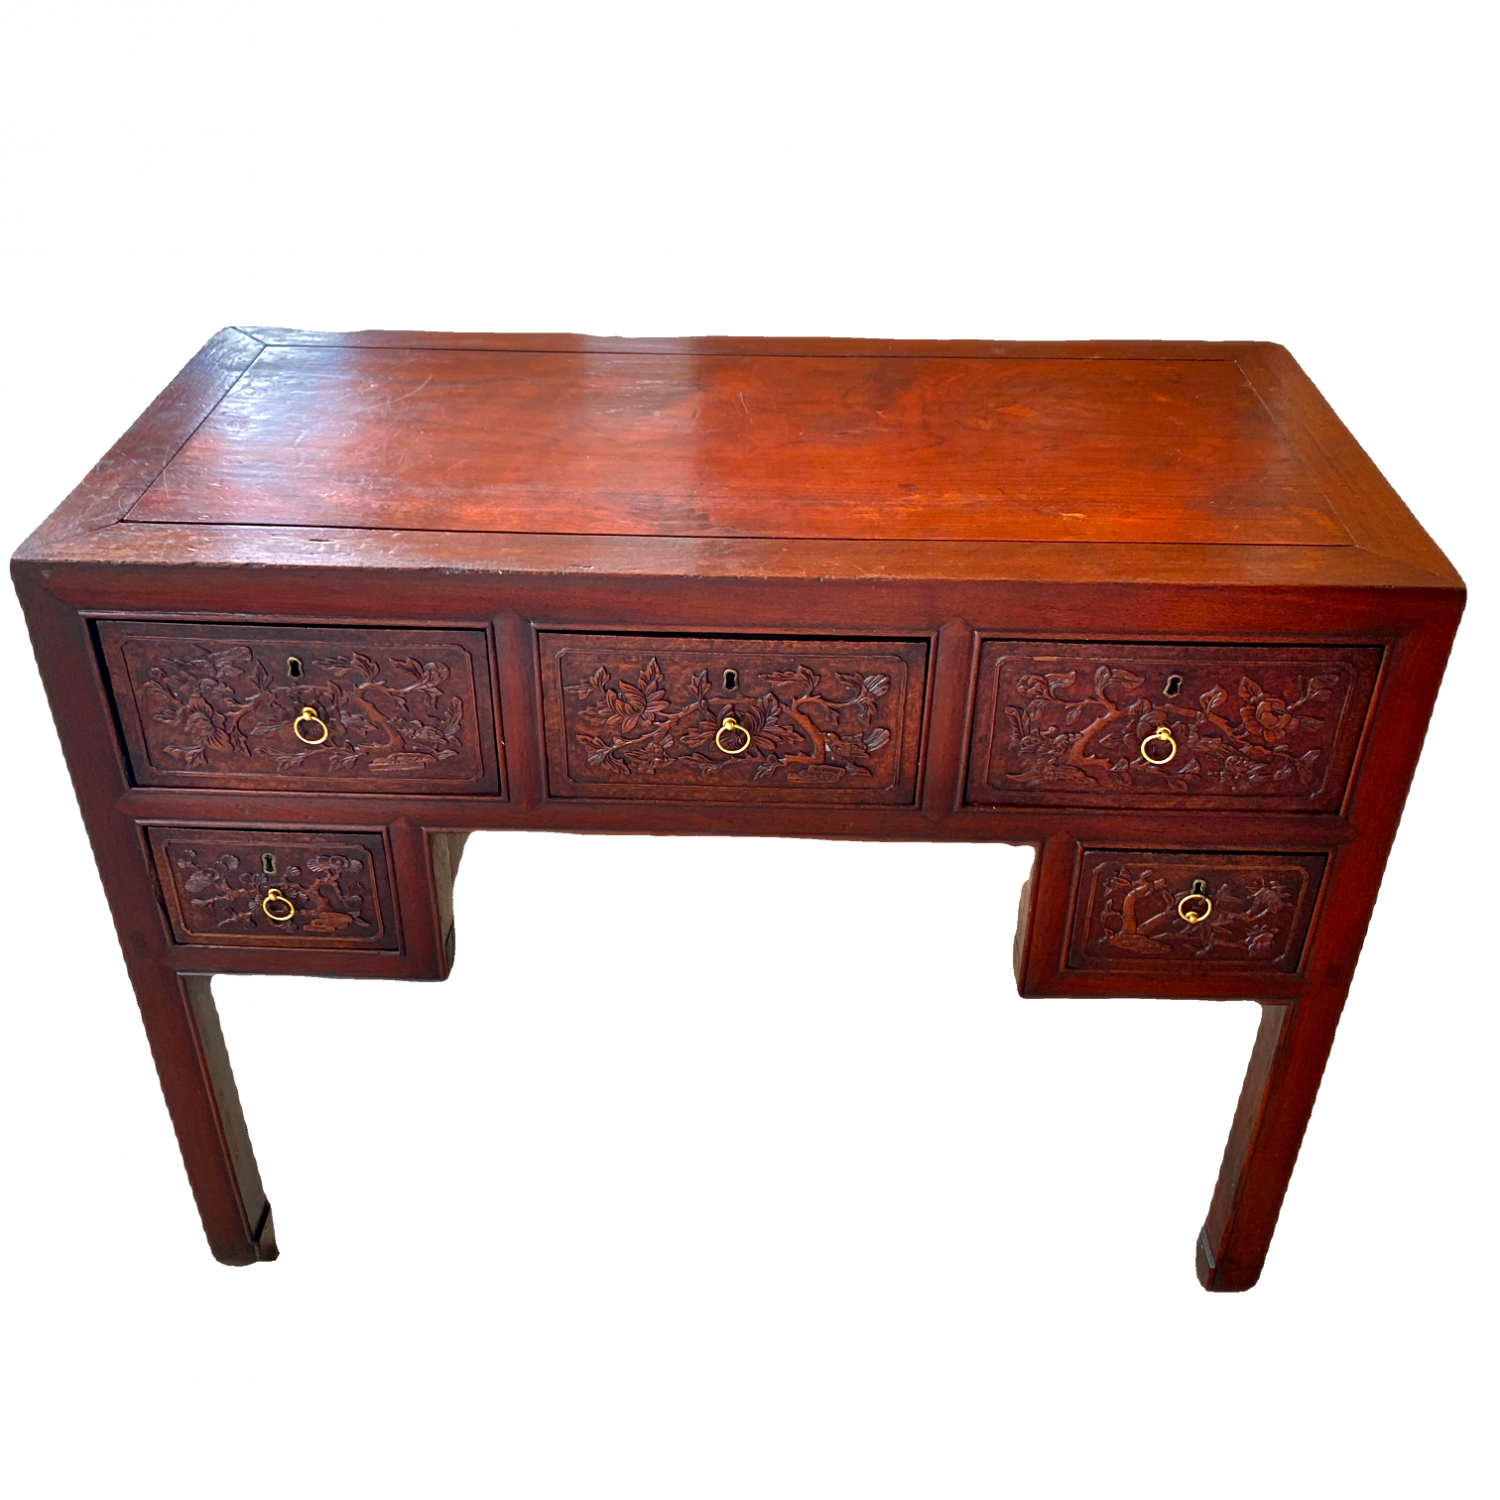 19th Century Chinese Carved Hardwood Desk - Oriental Antiques ...